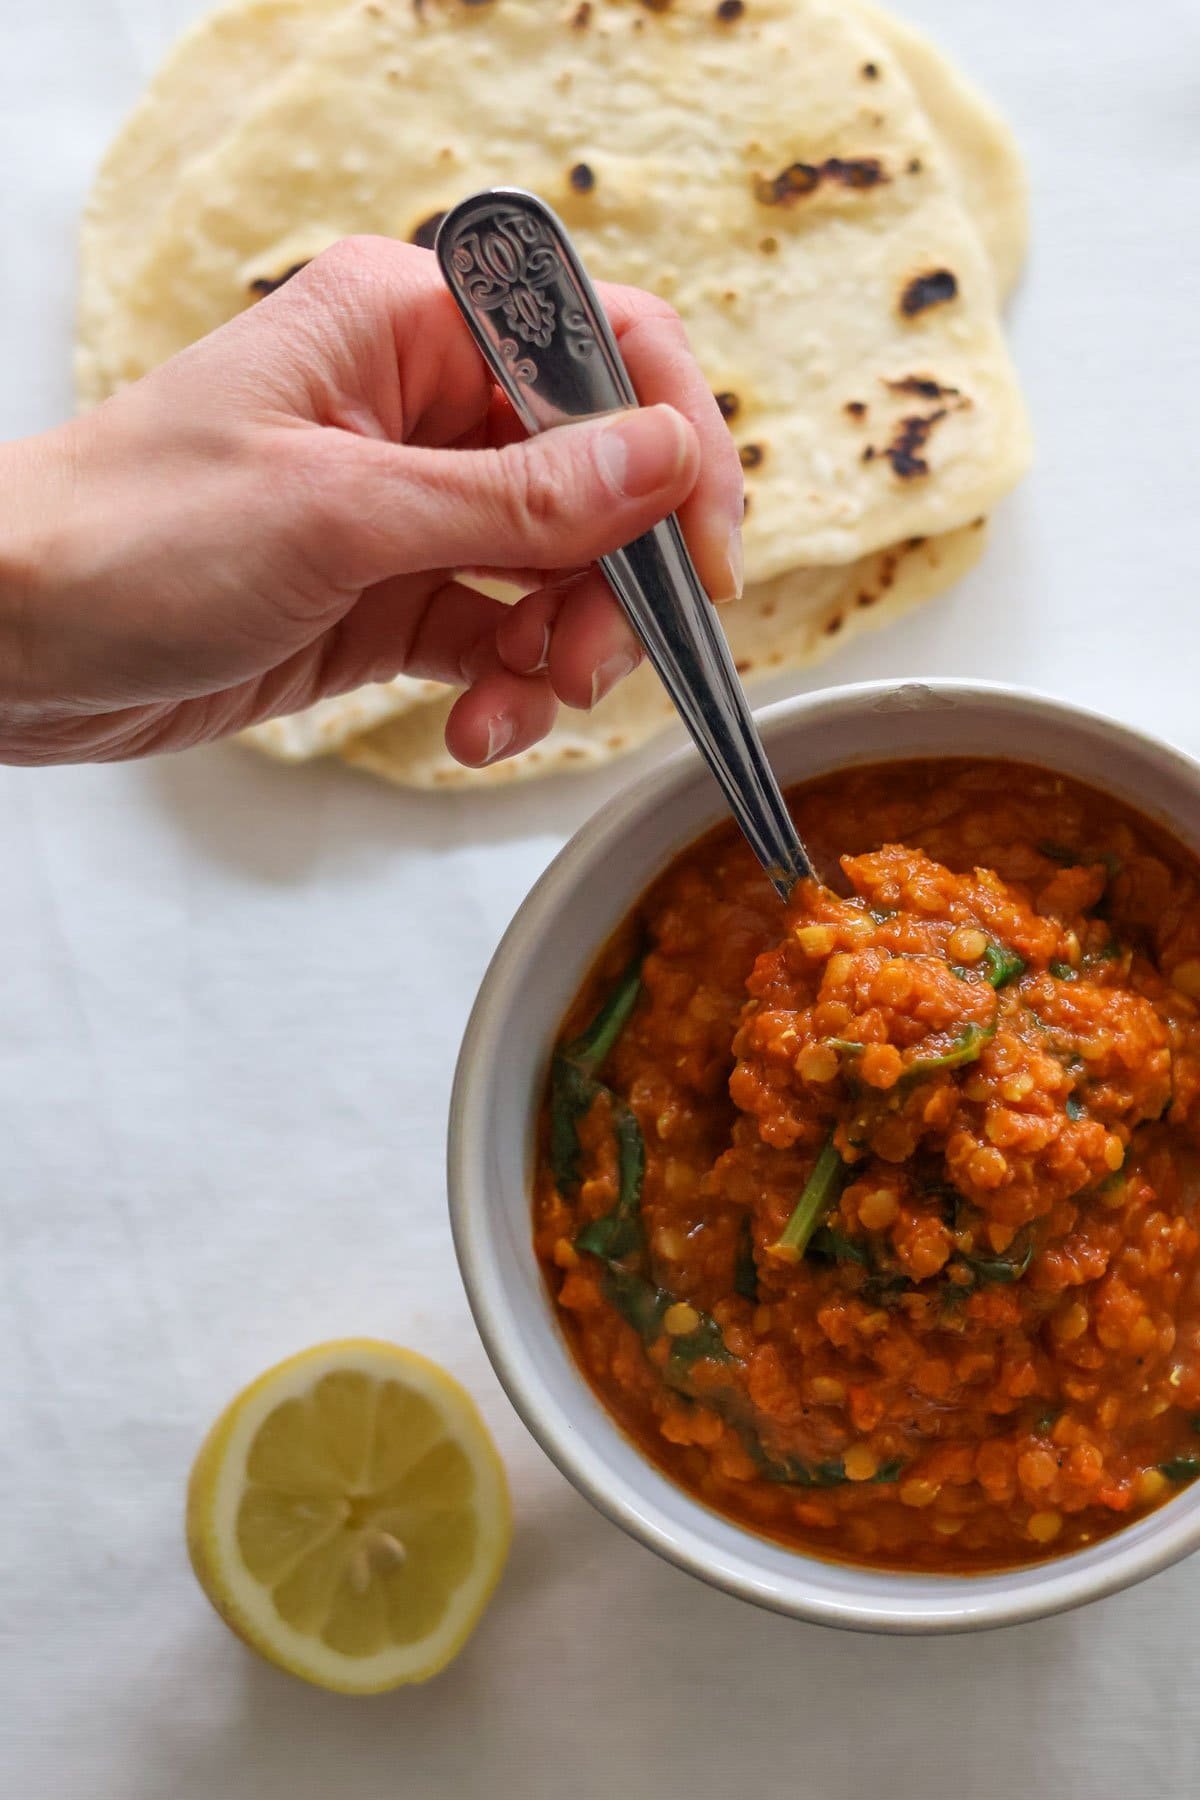 A hand holds a silver spoon in the masoor dal.